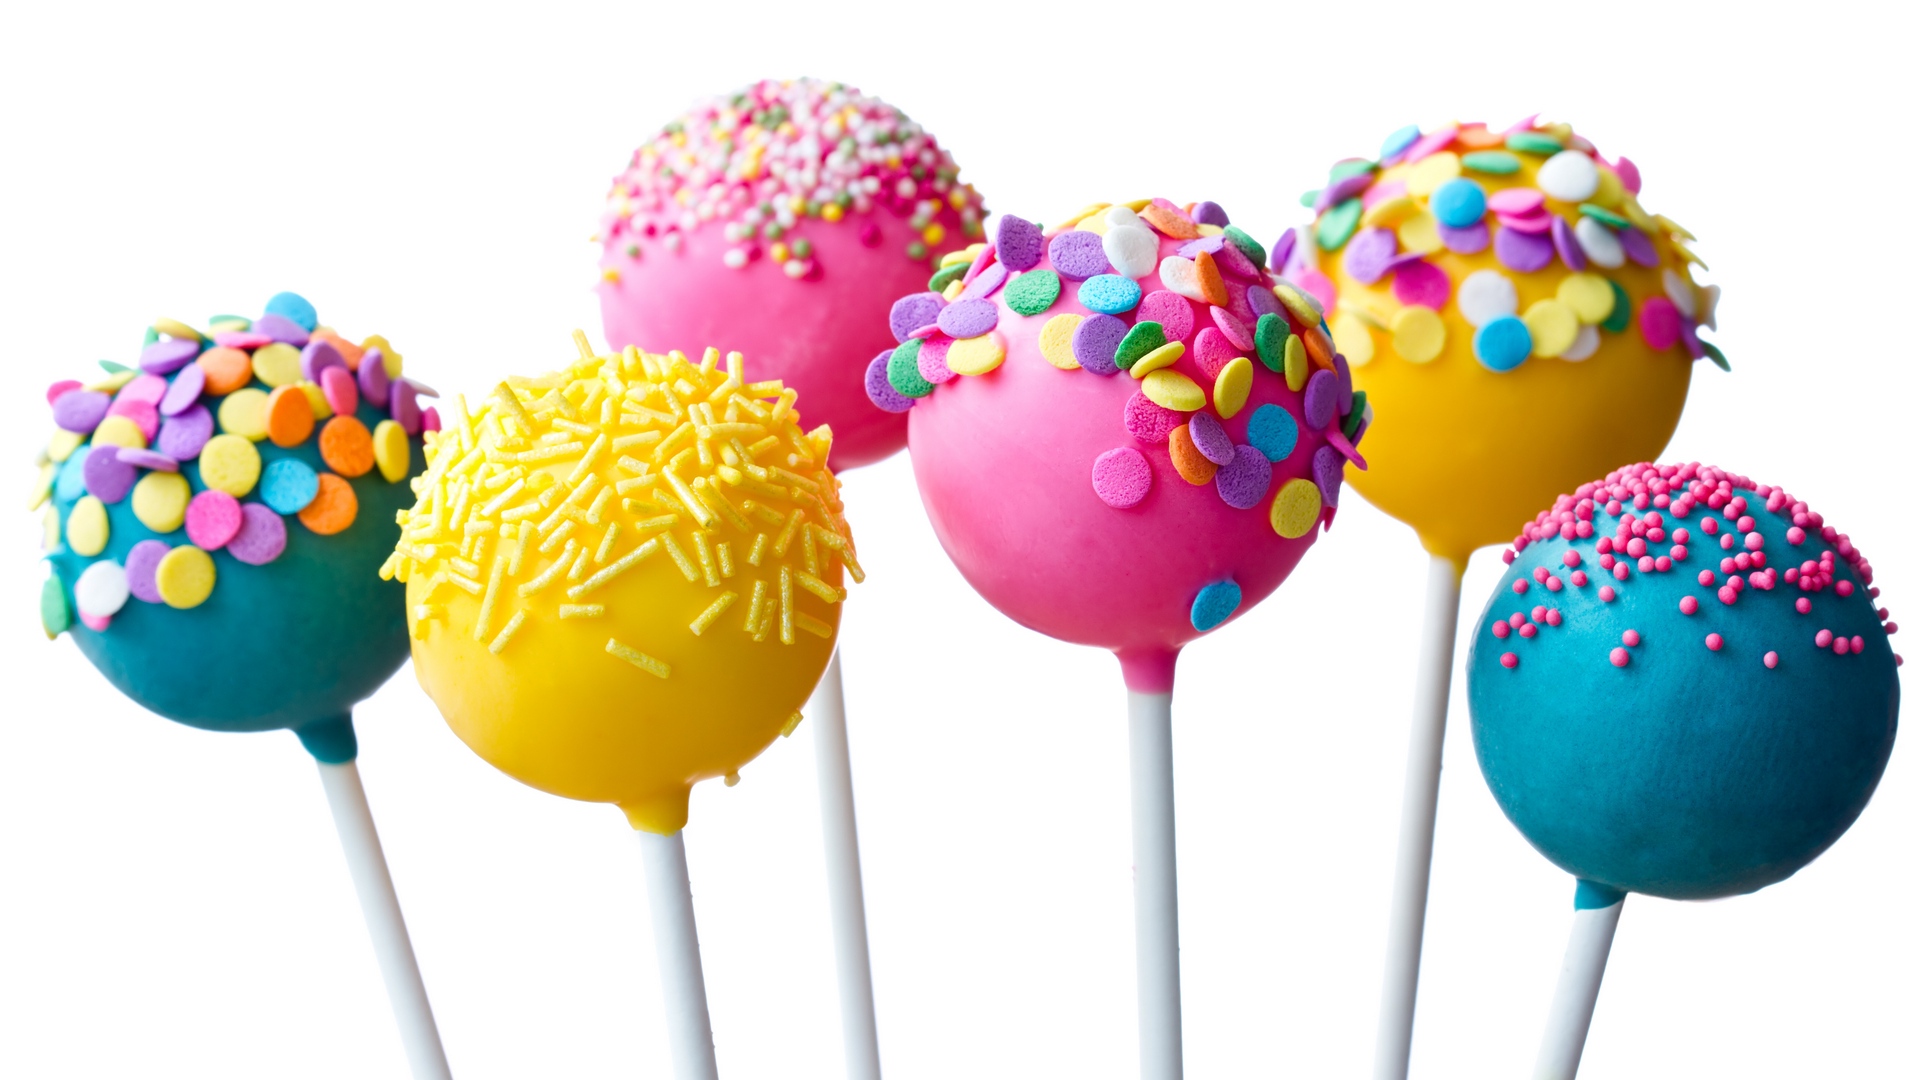 Colorful Lollipop Candy Sweets - Candy Sweets - HD Wallpaper 